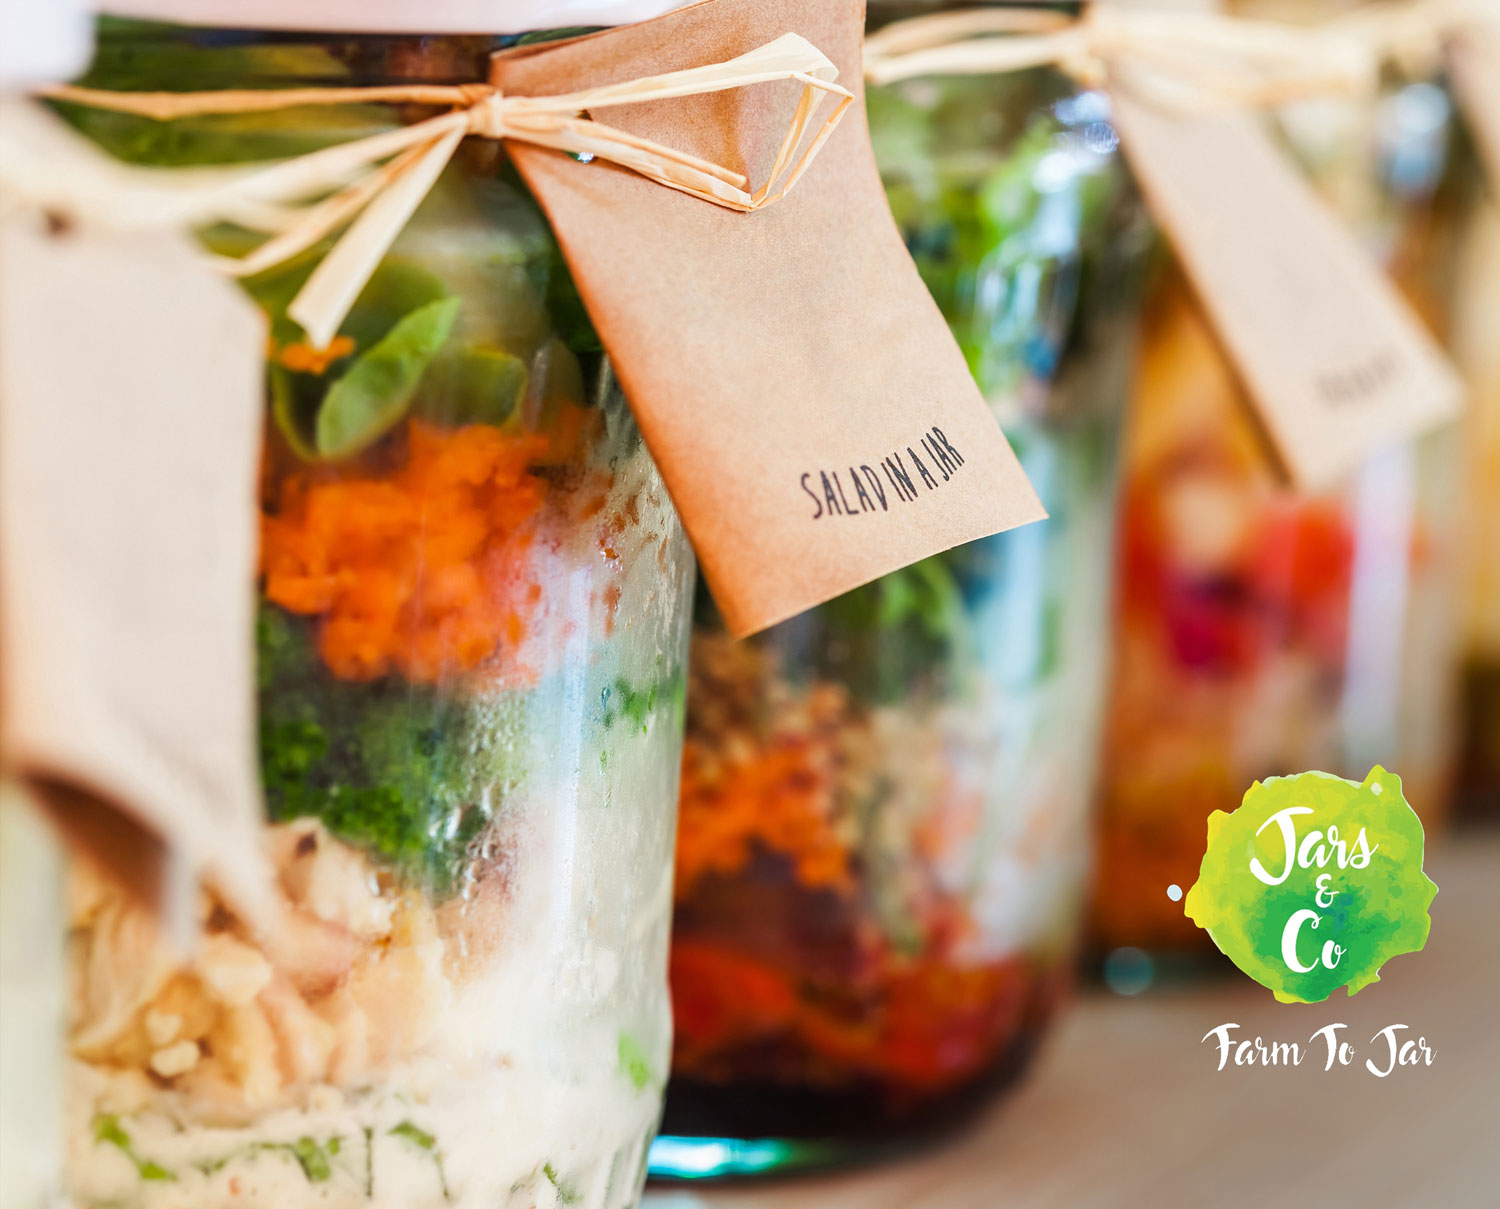 Healthy cooking in a jar in collaboration with Jars & Co